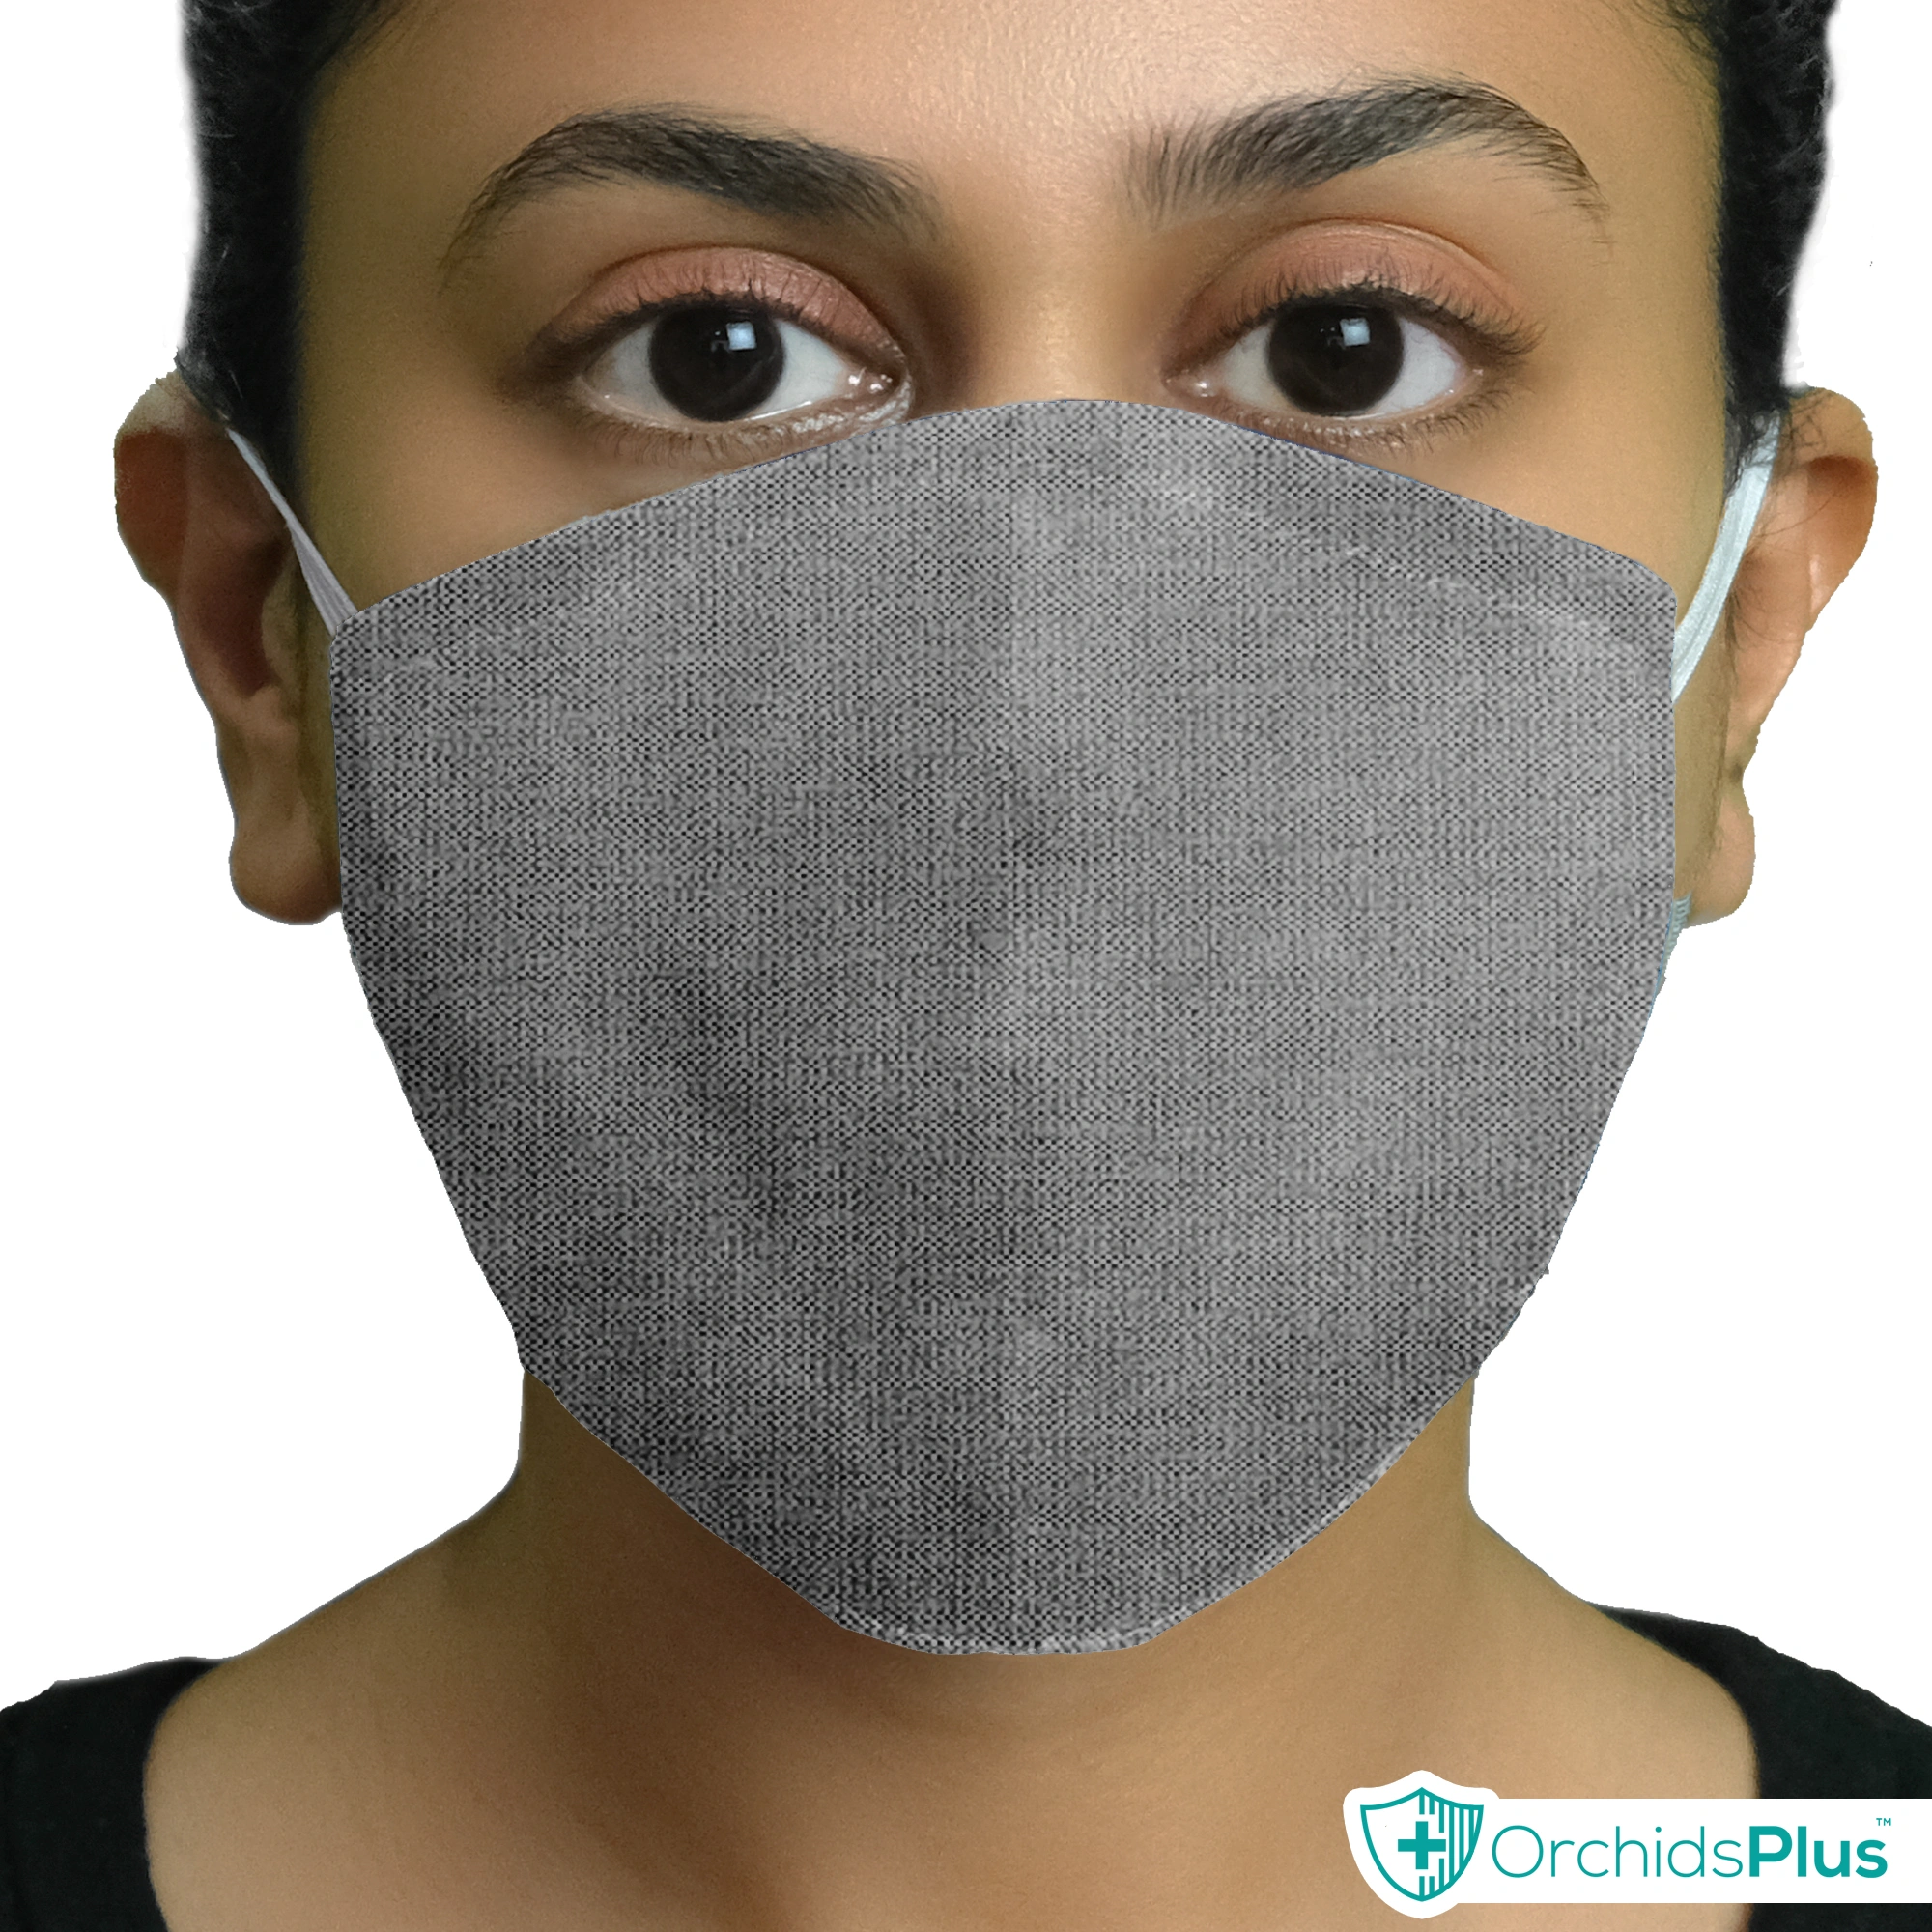 OrchidsPlus Active Face Mask | 2+ Layer | Washable | Reusable | Active Protection - Grey-5-1